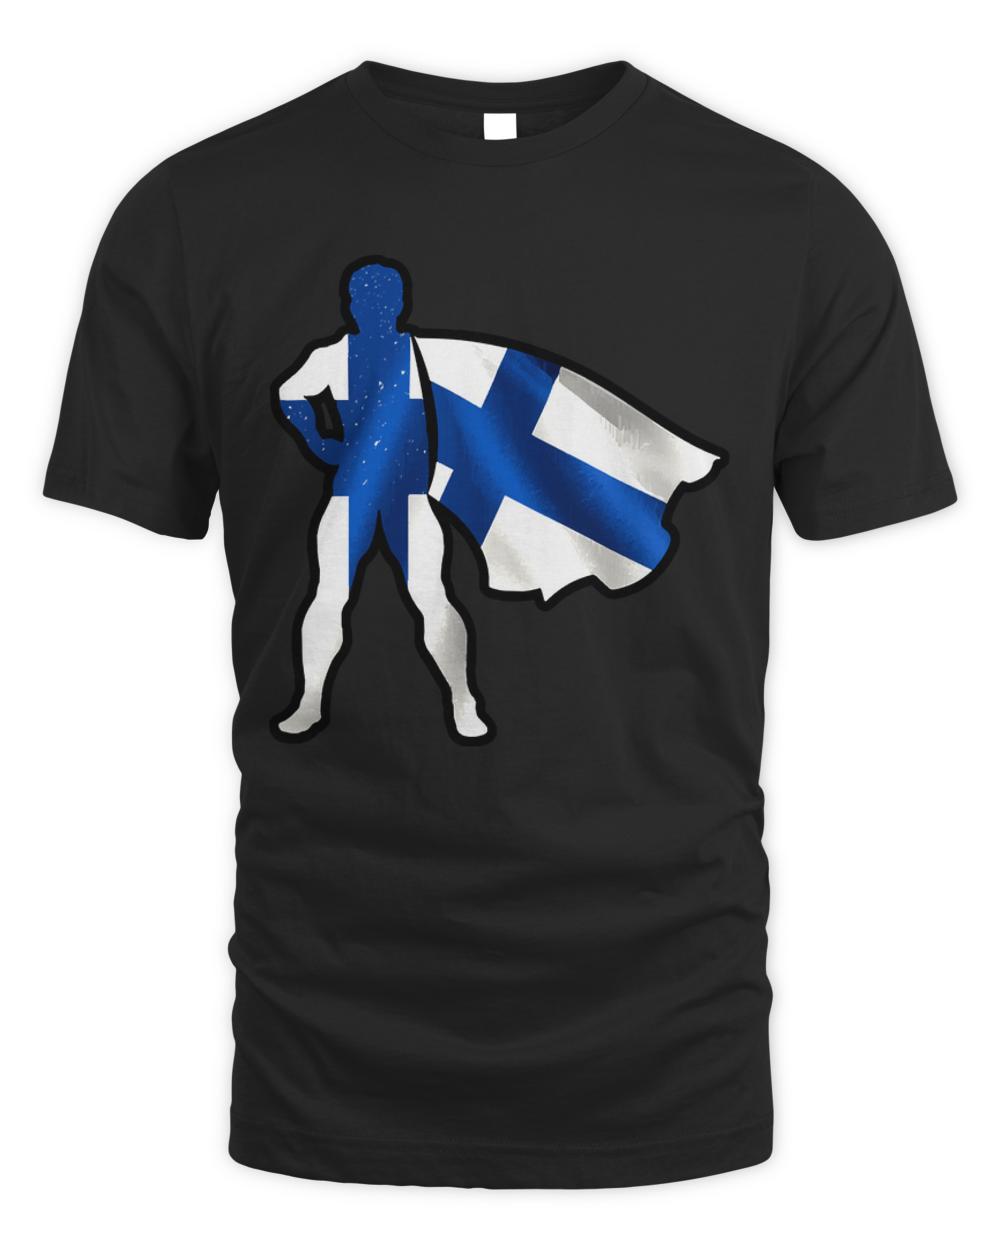 Finland Flag T- Shirt Finland Hero Wearing Cape of Finland Flag Hope and Peace Unite in Finland T- Shirt